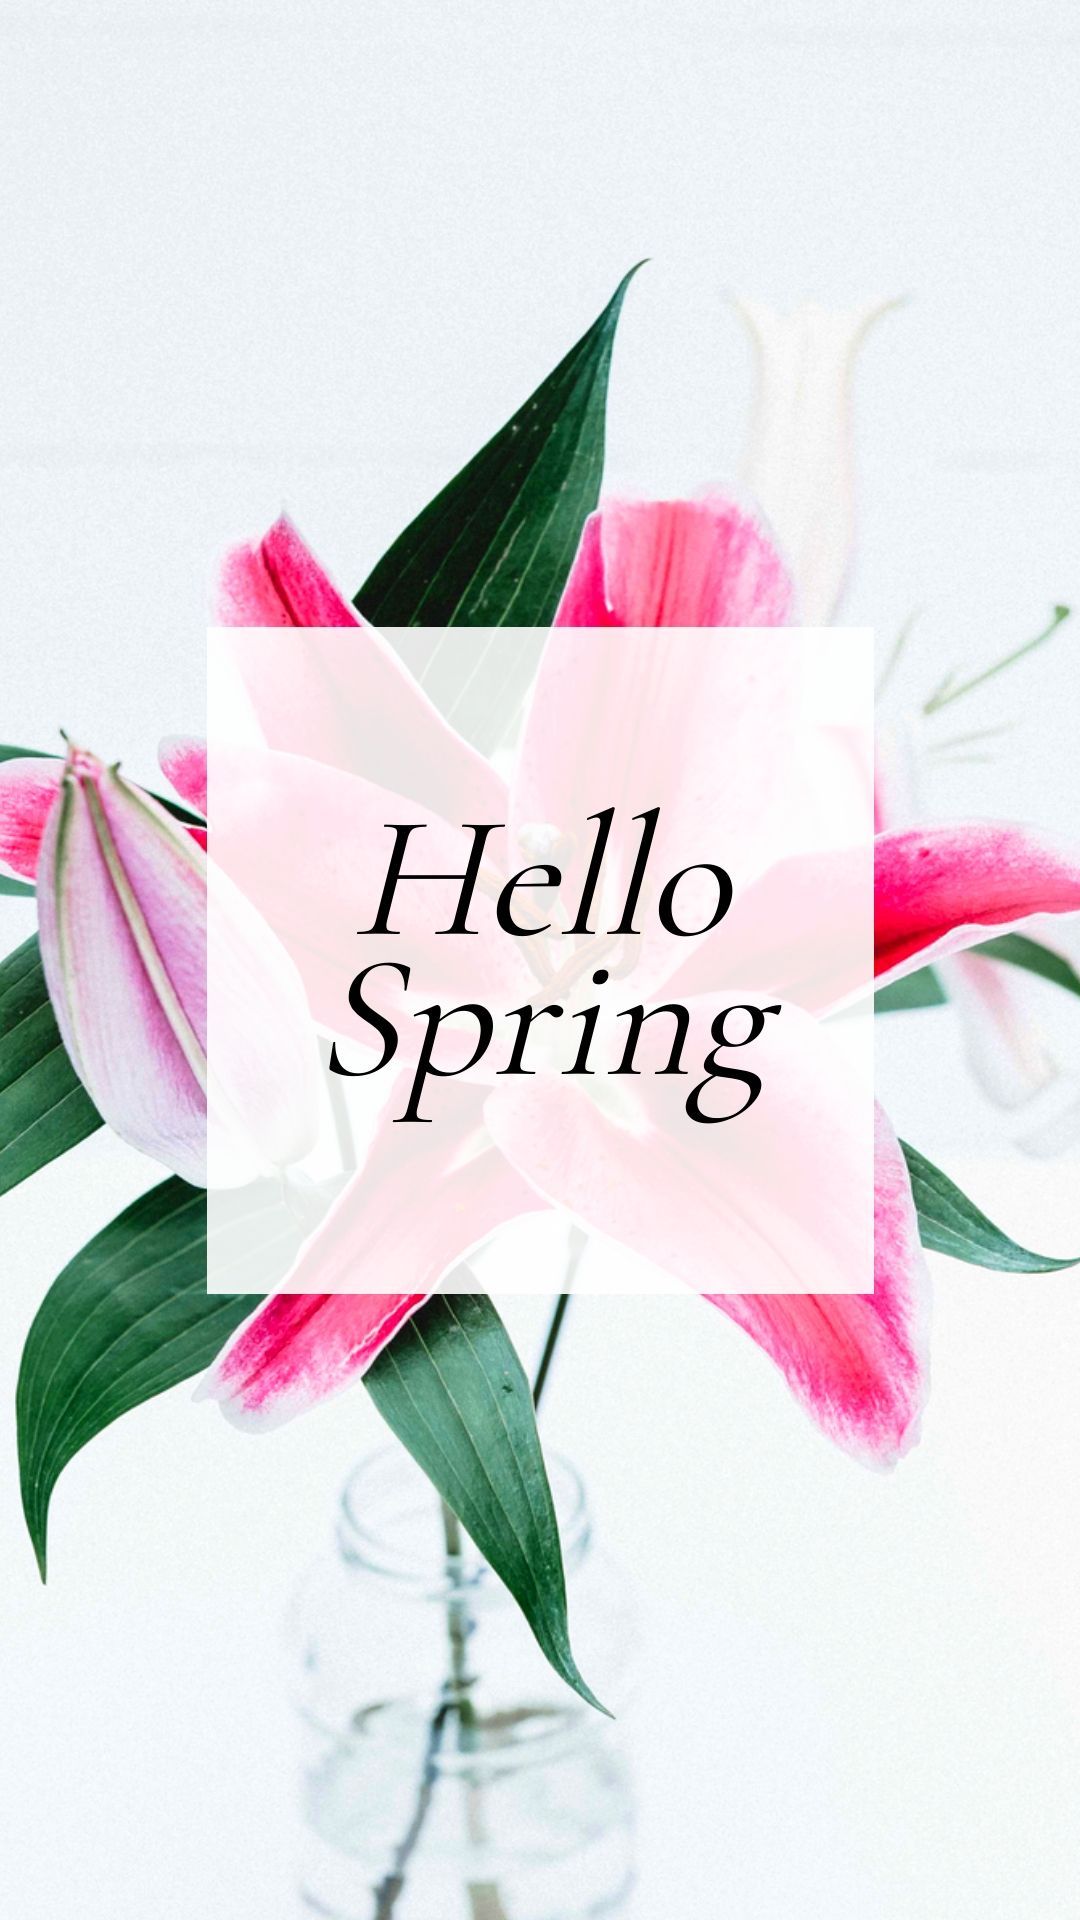 Hello Spring Wallpaper for iPhone Mobile